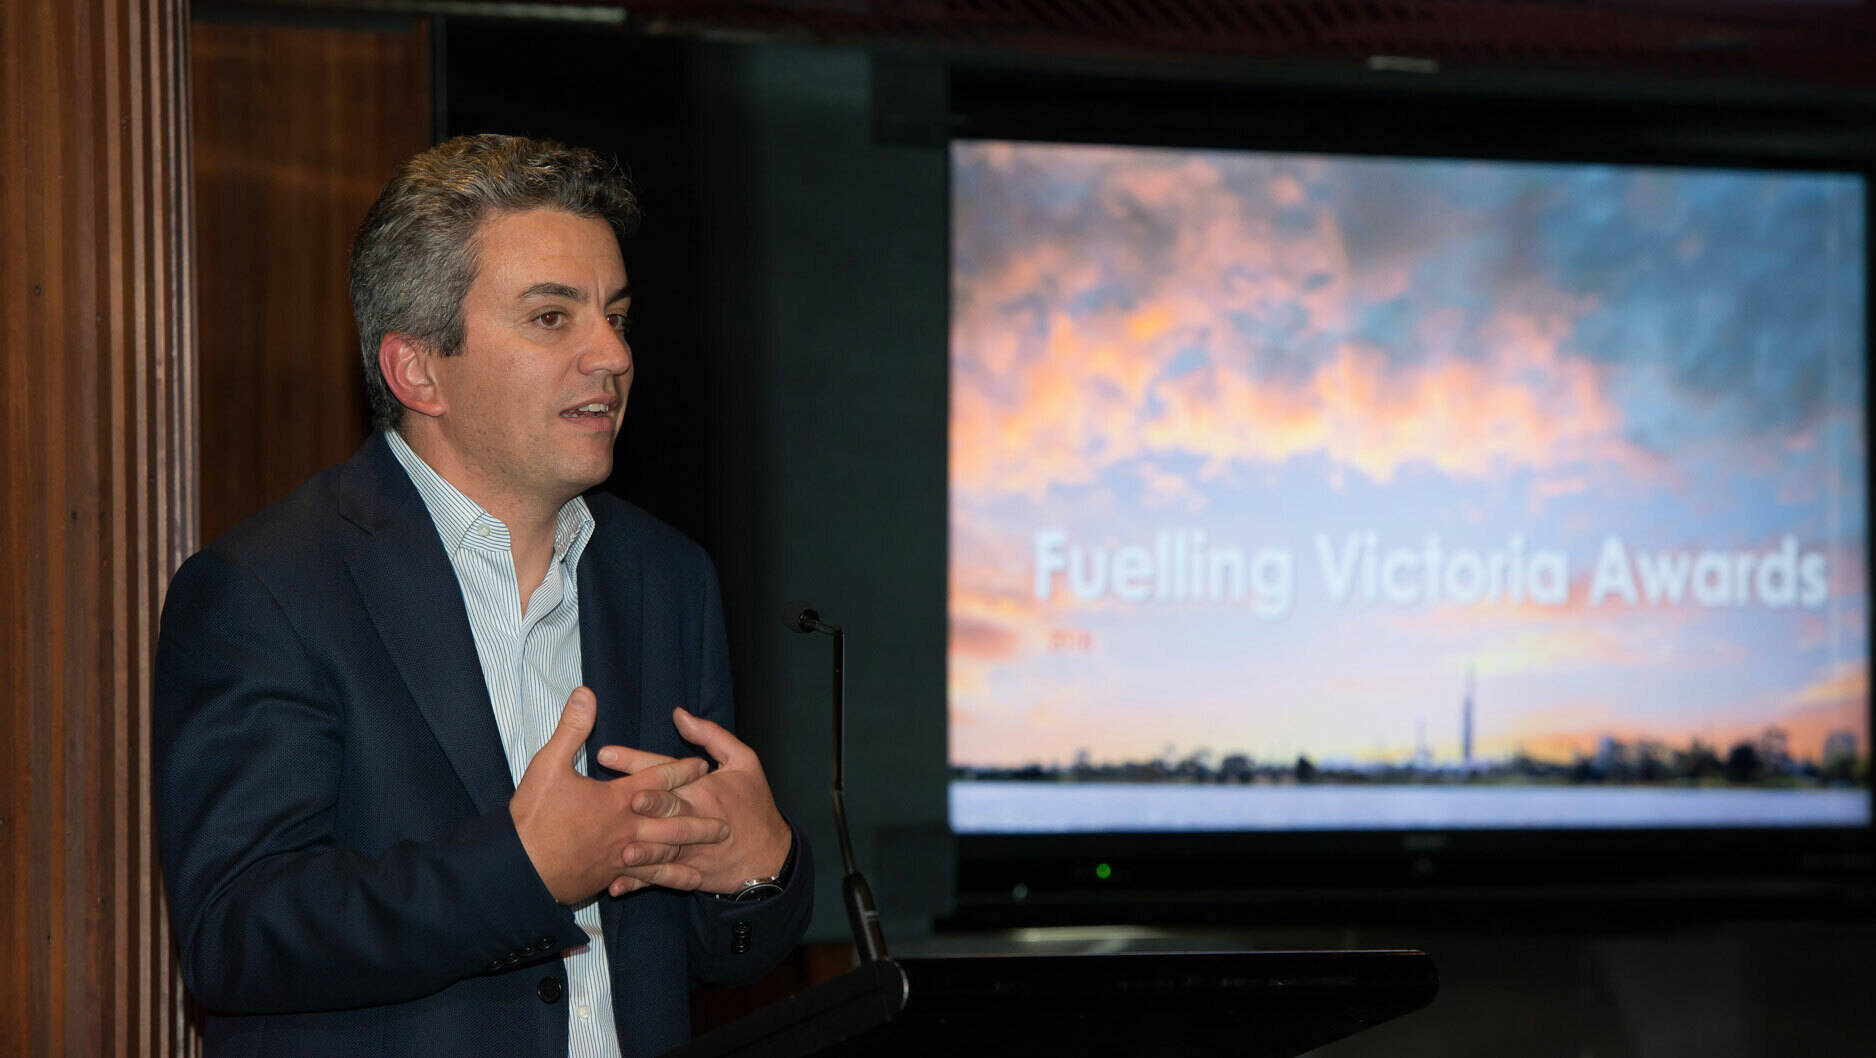 Image Photo Altona Refinery Manager Riccardo Cavallo addresses attendees at the 2018 Fuelling Victoria awards.